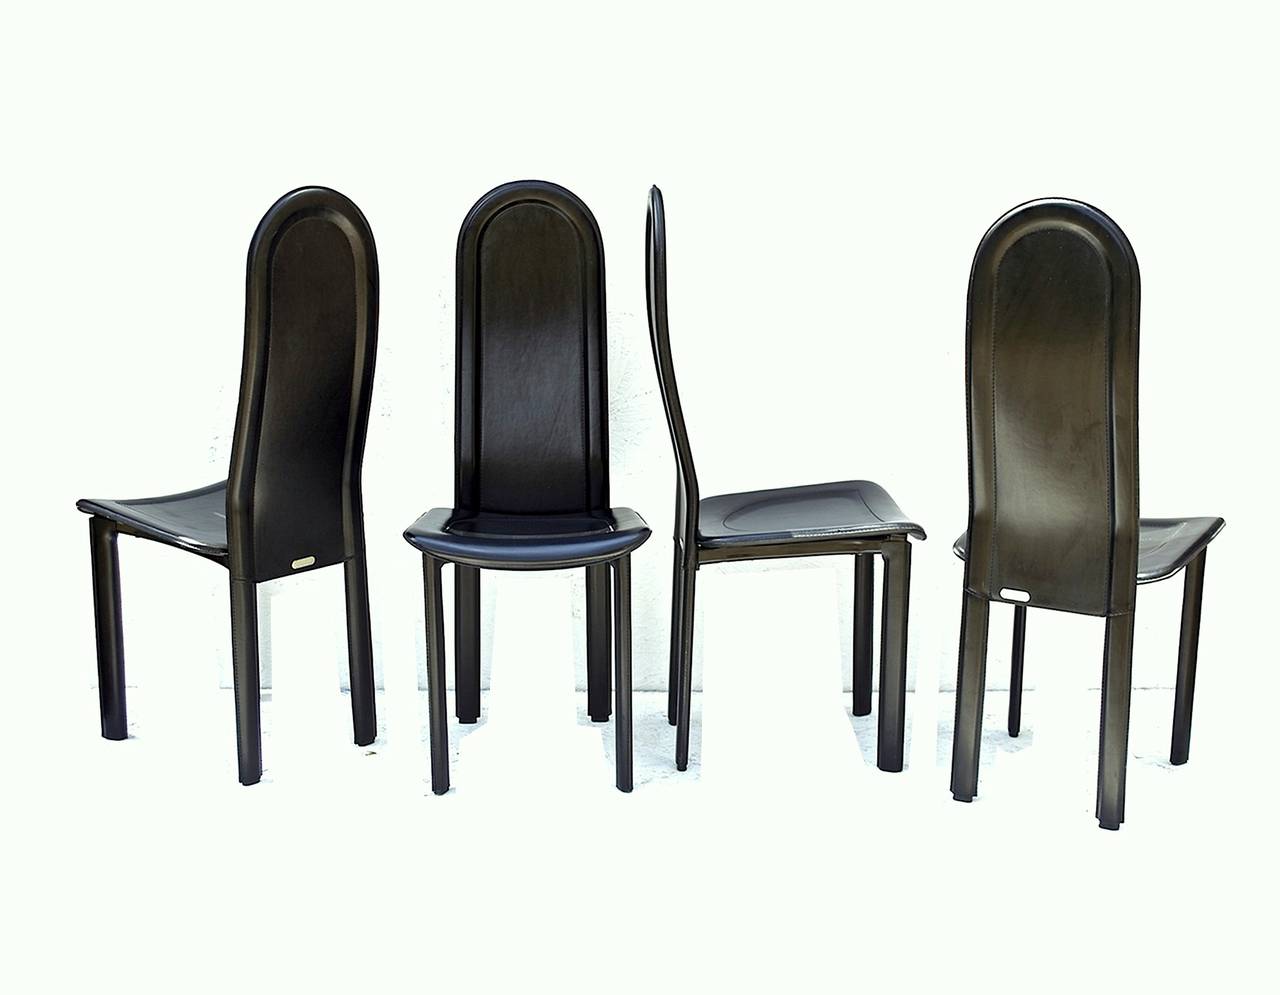 Set of black leather dining chairs by Artedi UK. These eye-catching sculptural dining chairs supply ample comfort and aggressive styling’s that define the very nature of 20th century furniture design. The quad of chairs were part of a Maxwell House